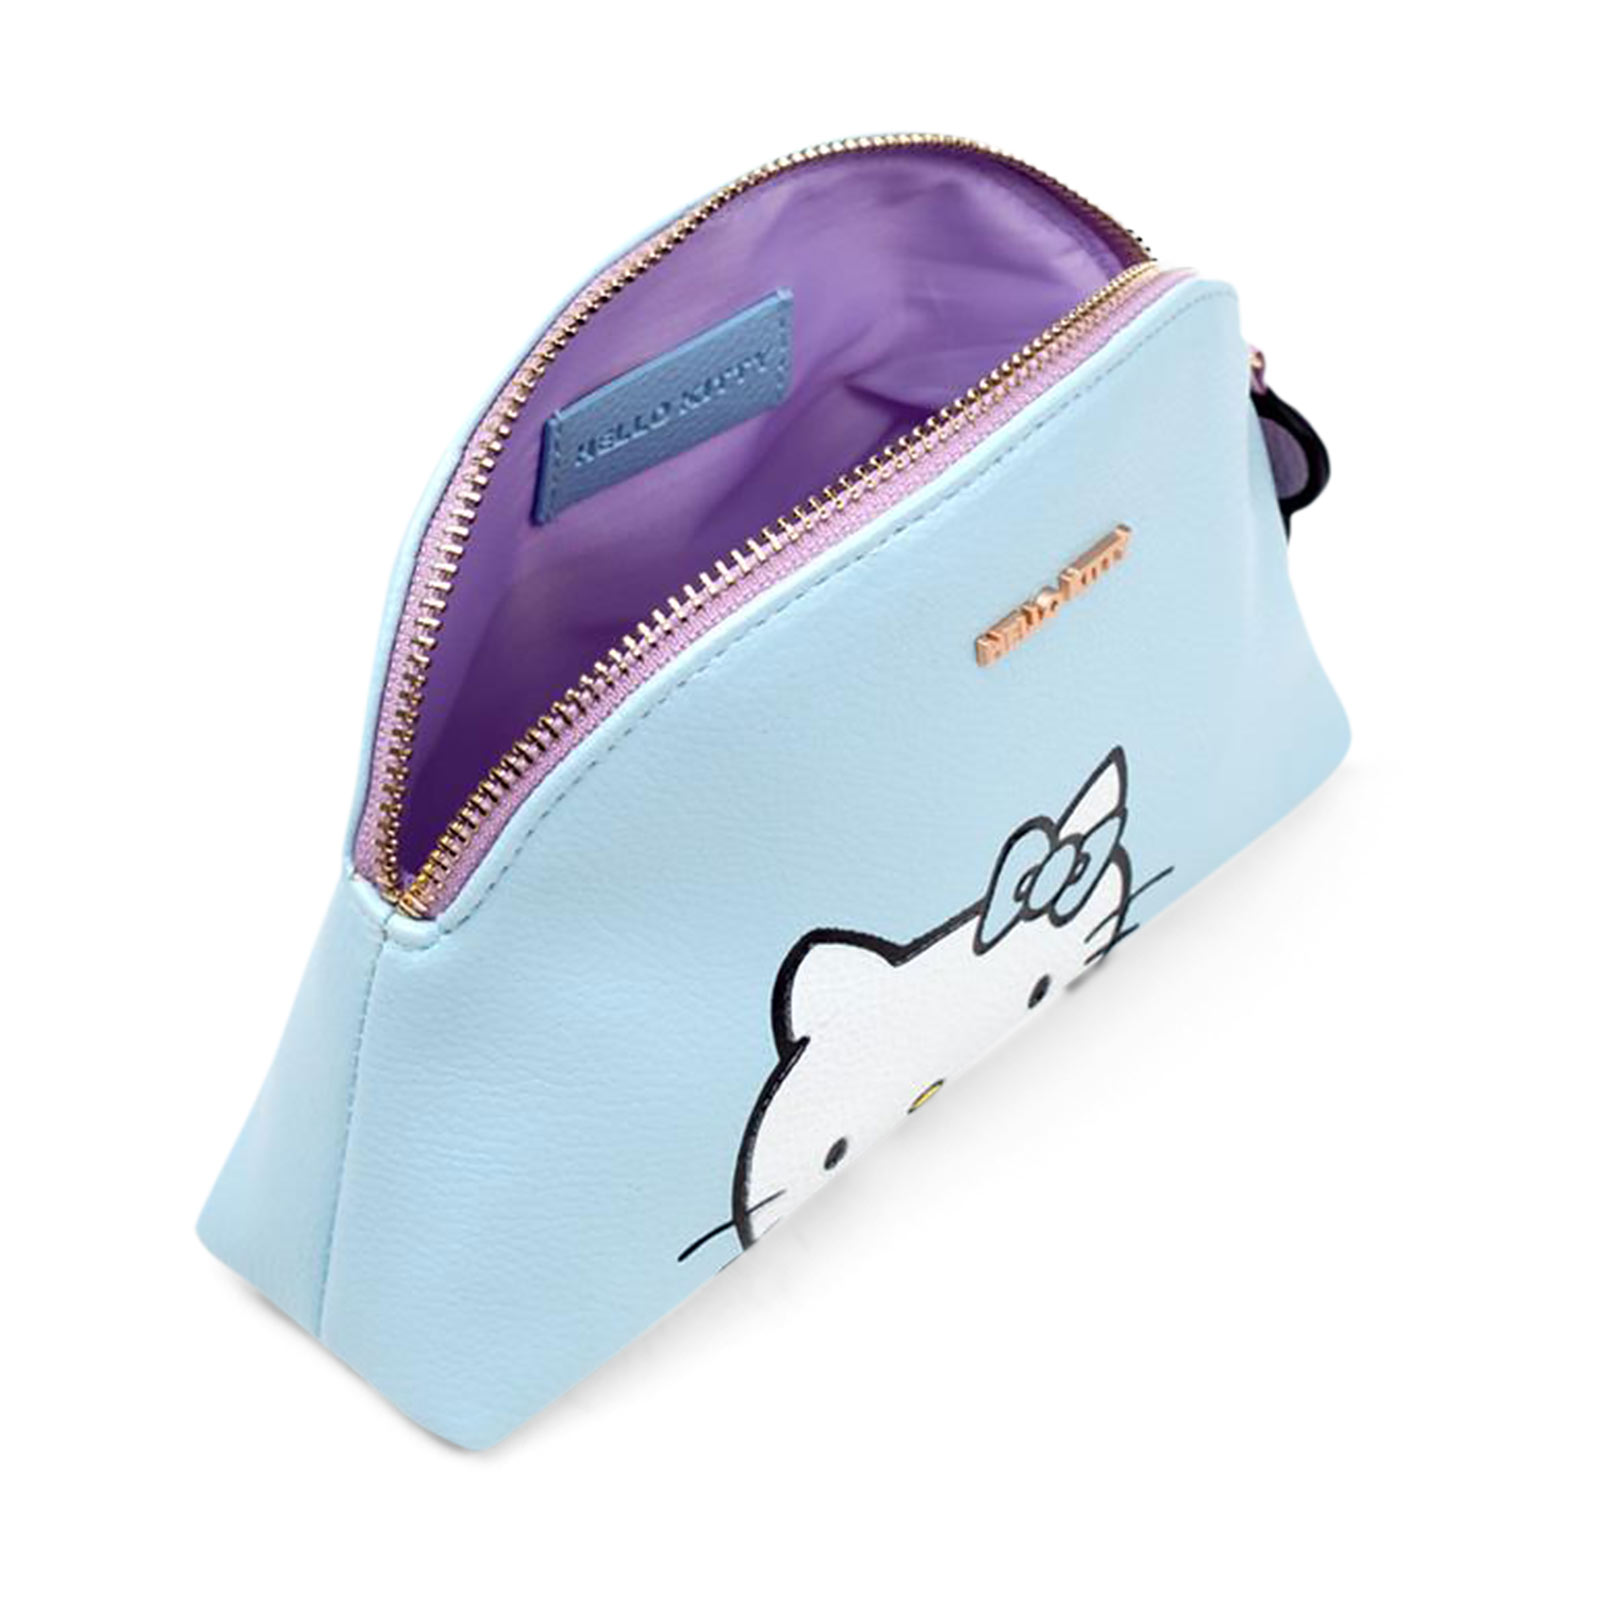 Hello Kitty - Be Quiet Cosmetic Bag Blue